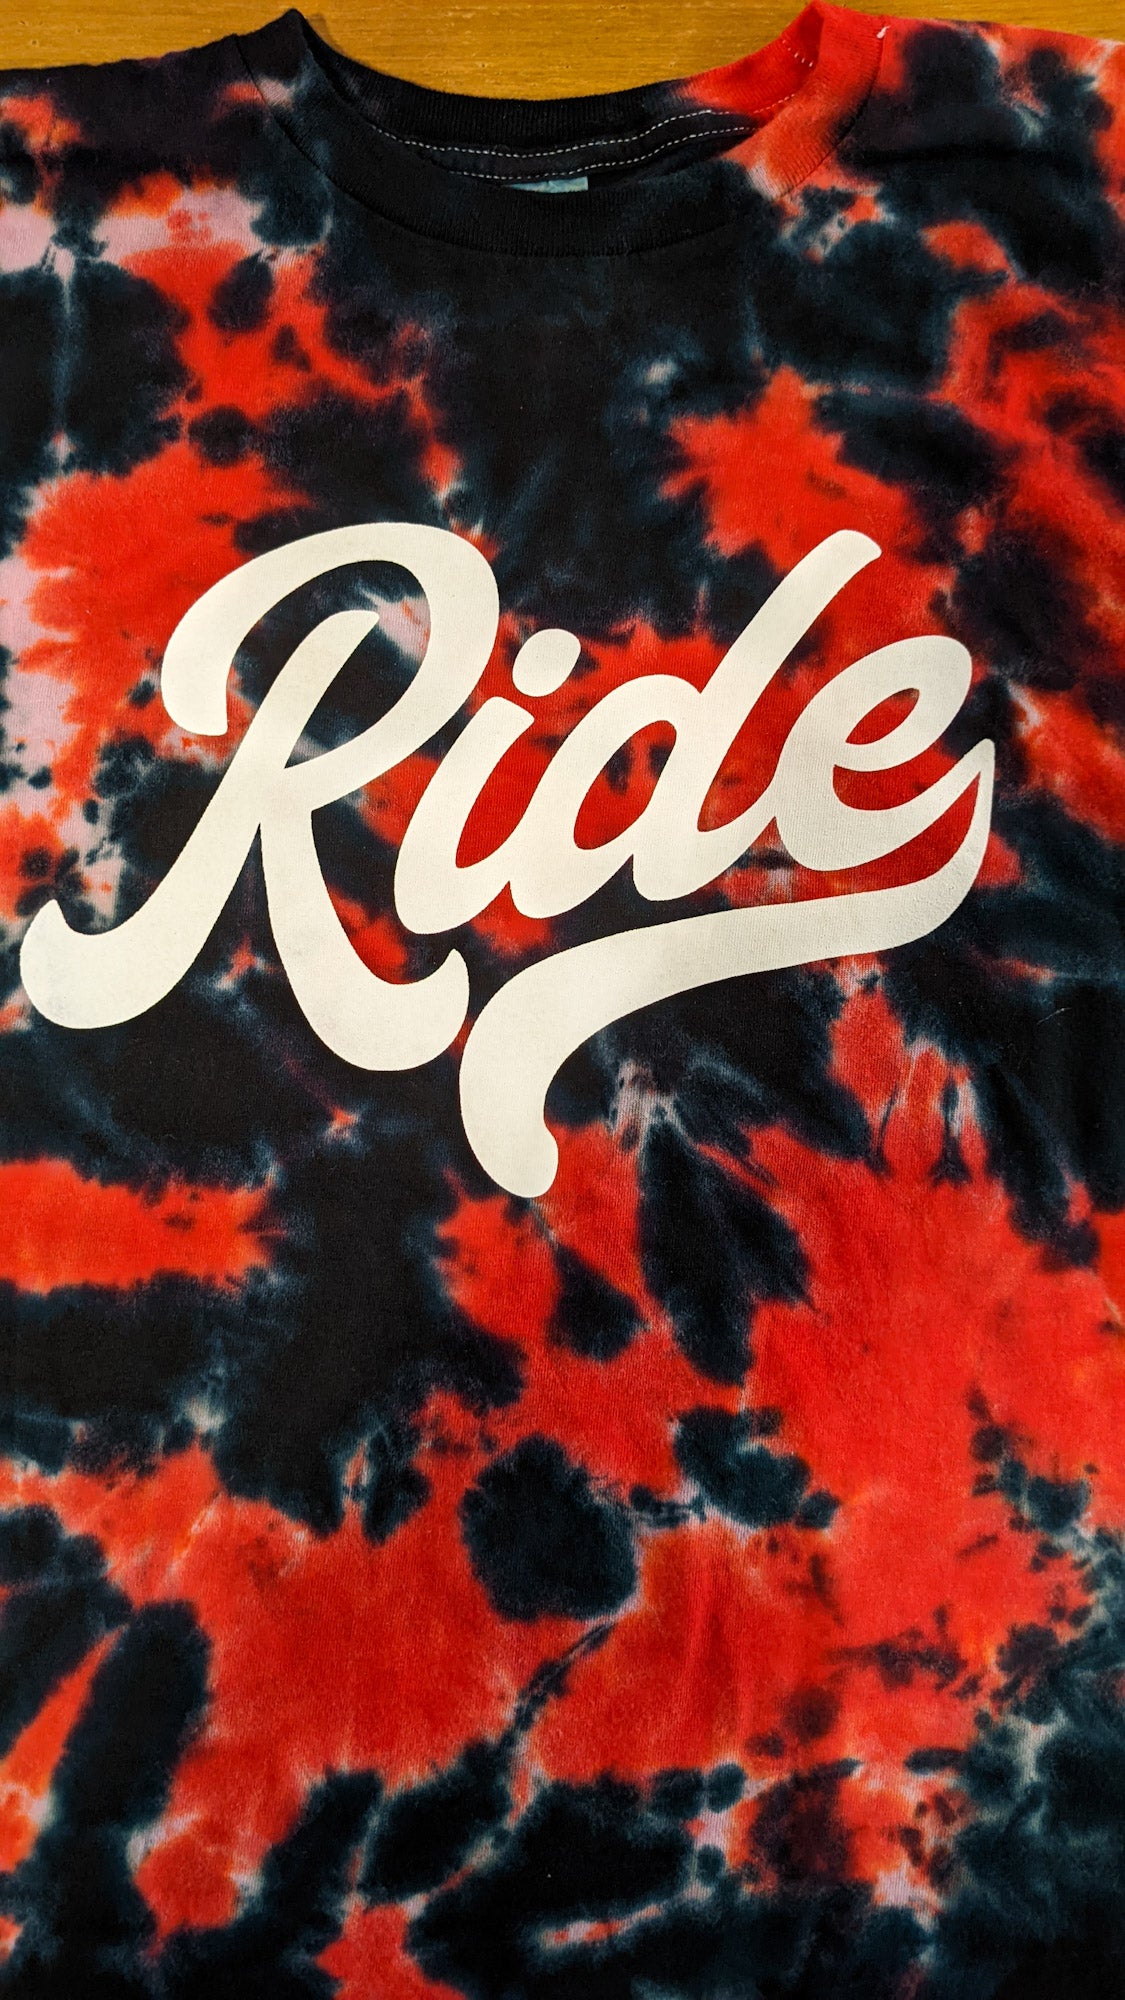 Limited Edition Tie-Dye Ride T